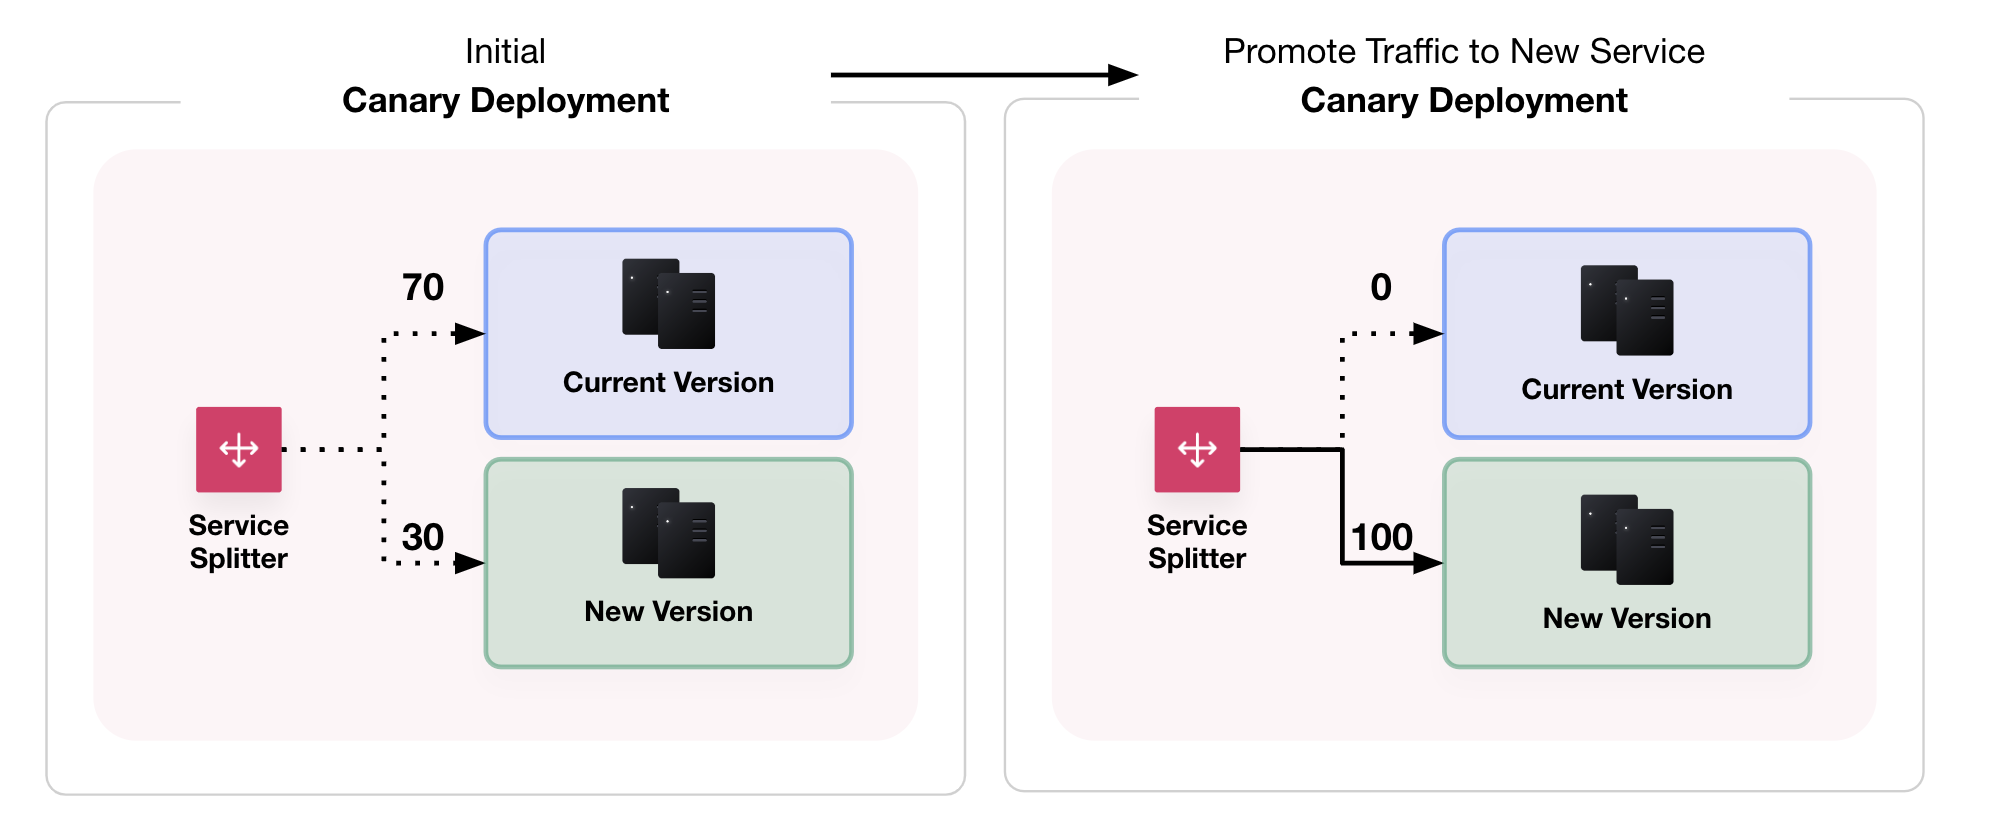 Diagram for canary deployments. Initially, you route a small fraction of the
traffic to the new version. Eventually, you increment traffic to the new version
until you fully promote the new version.